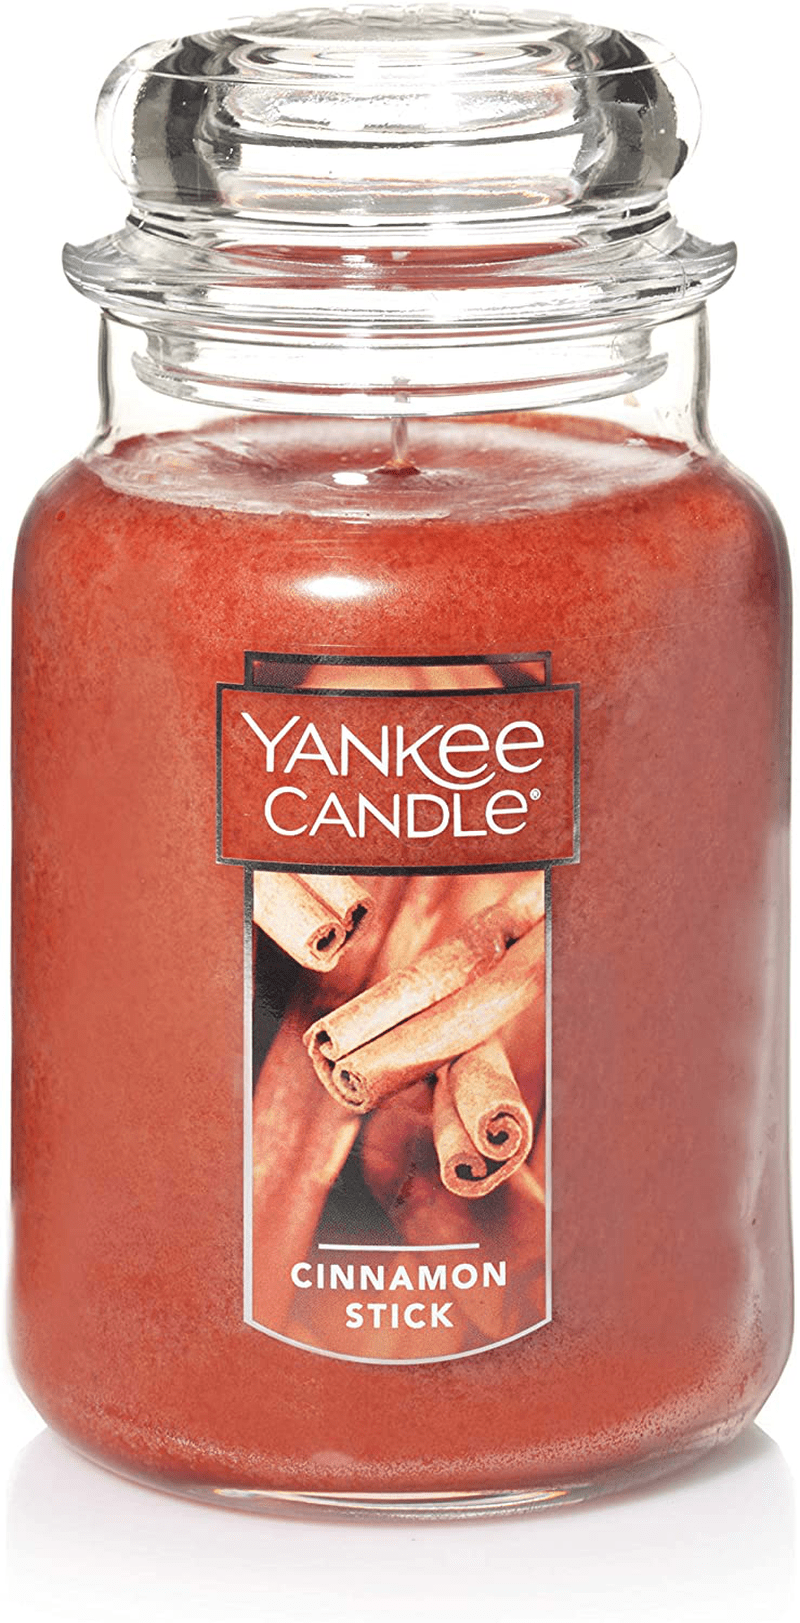 Yankee Candle Large Jar Candle Home Sweet Home Home & Garden > Decor > Home Fragrances > Candles Yankee Candle Cinnamon Stick Large Jar 